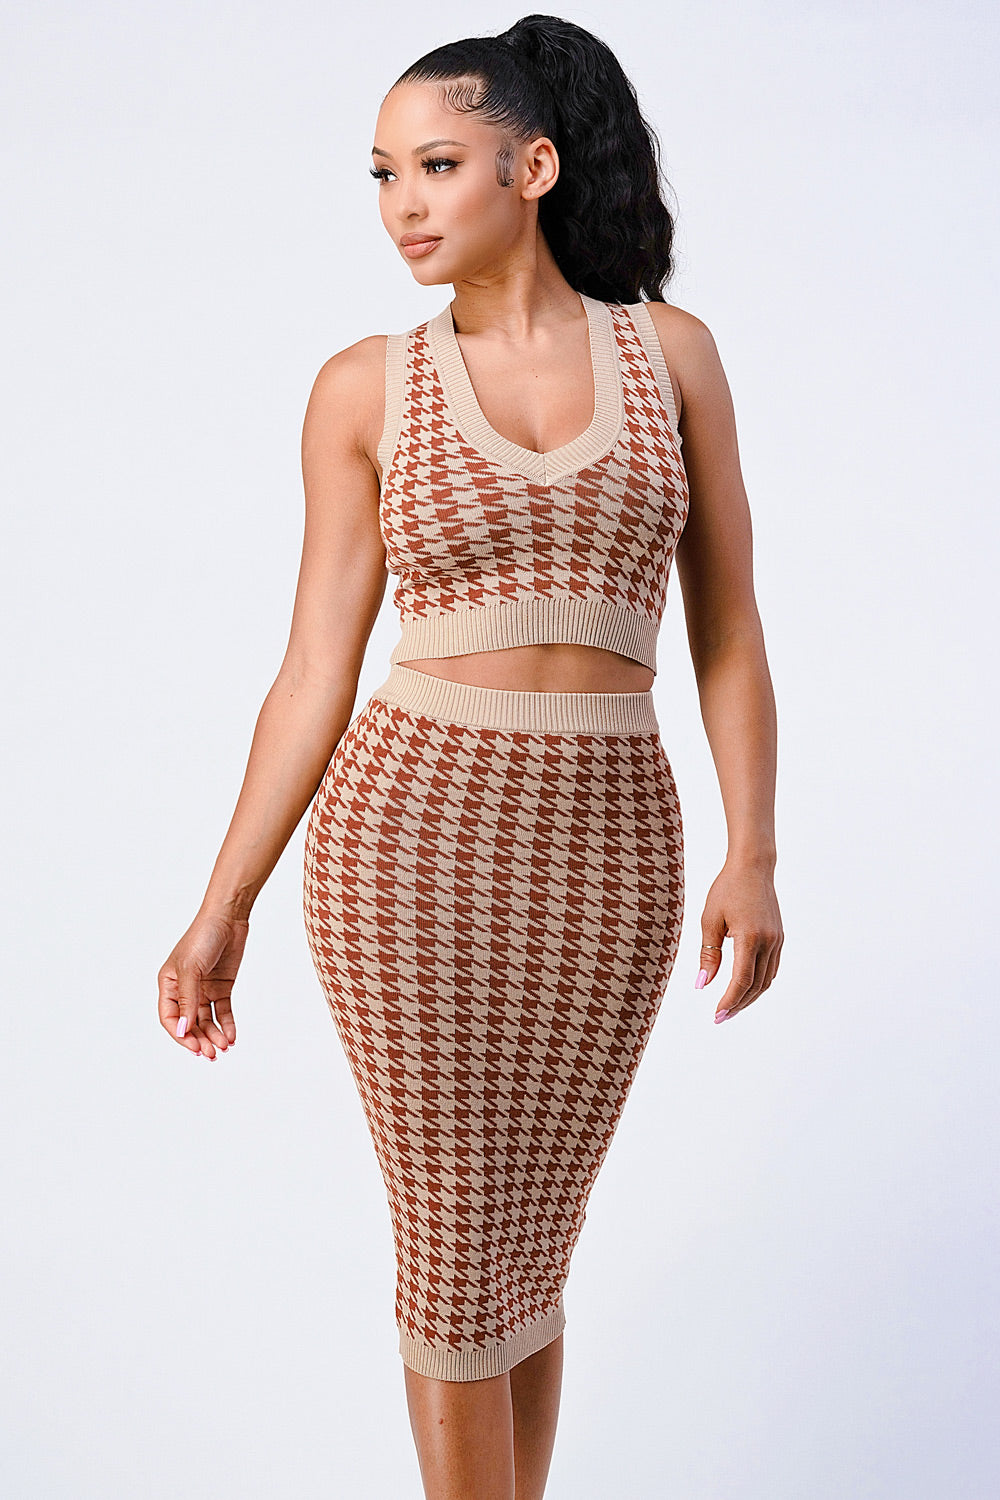 Luxe Gingham Rib Knit Top And Skirt Sets - Love It Clothing